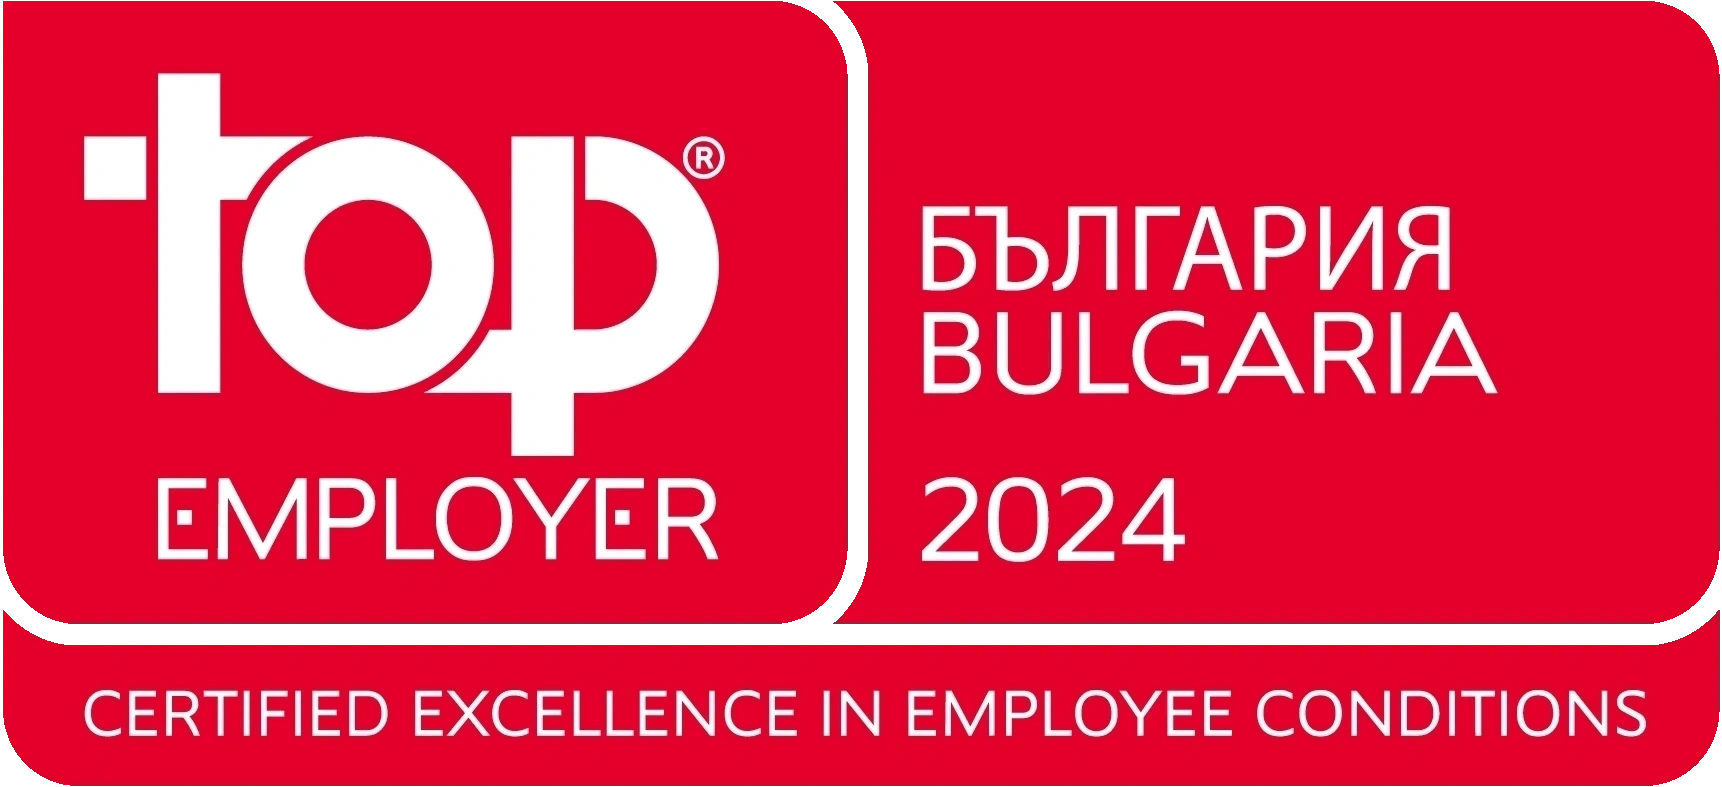 We are a Top Employer in Bulgaria